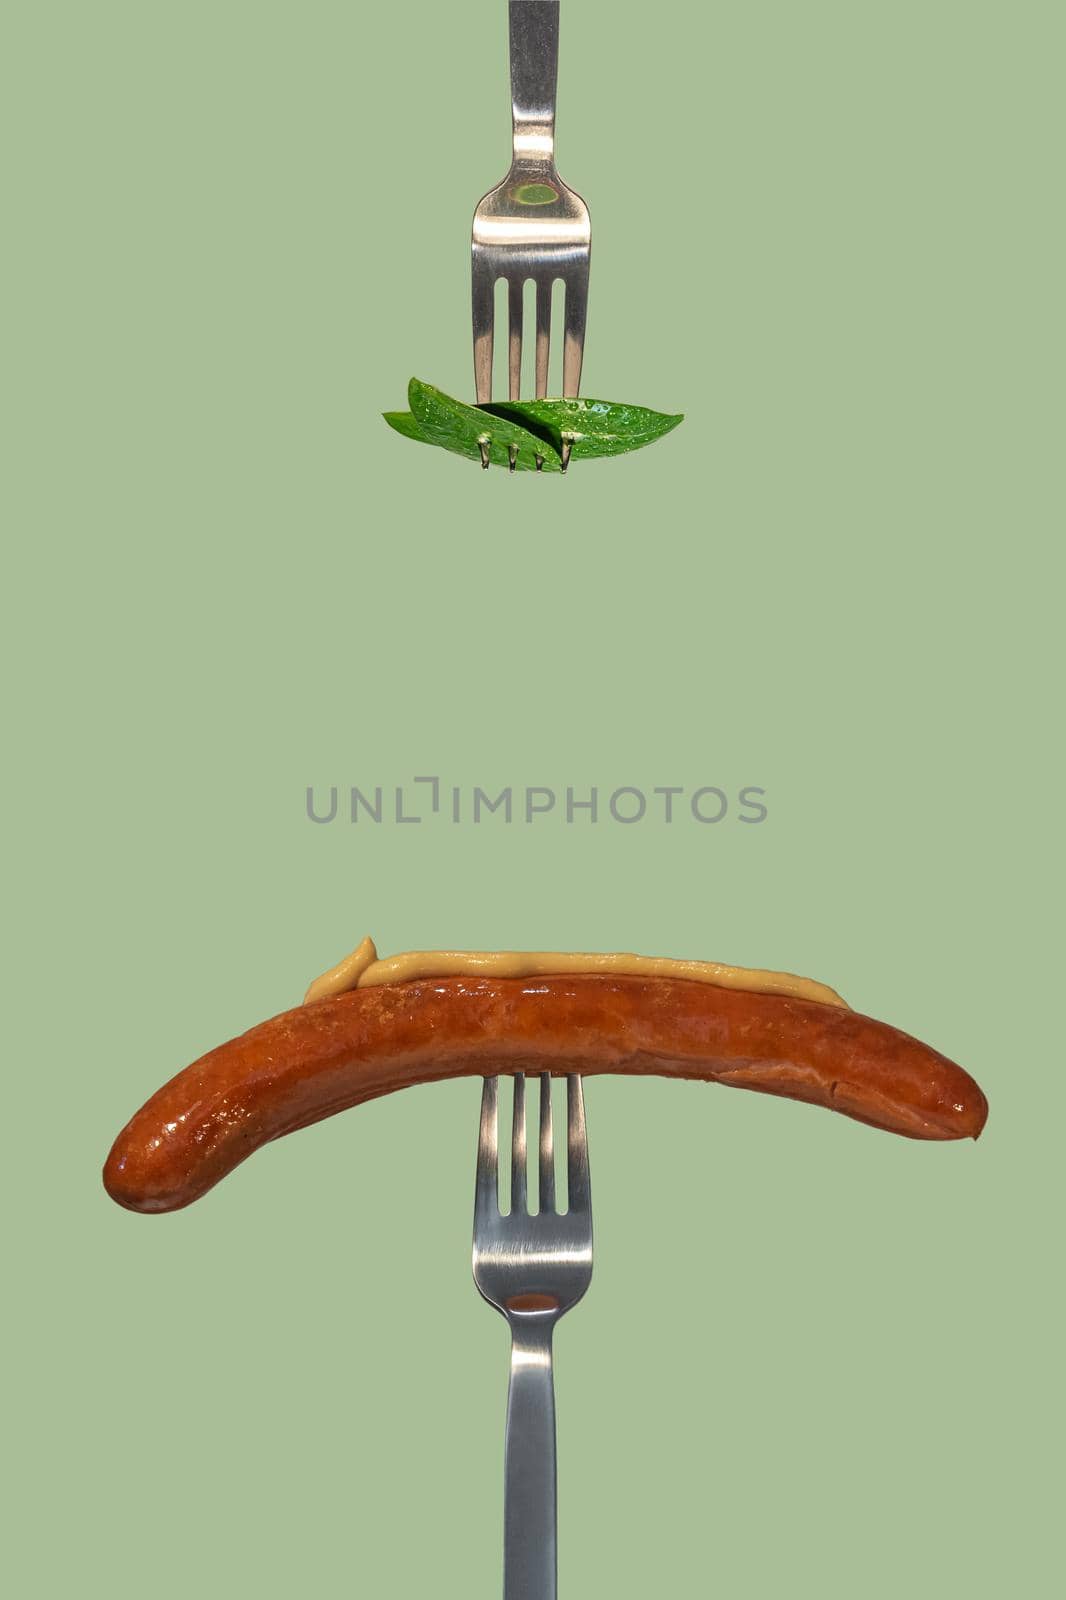 Green fresh leaves picked by a fork for eating as new vegan food and grilled sausage with mustard on another fork at salad color solid background with copy space for text, closeup, details.